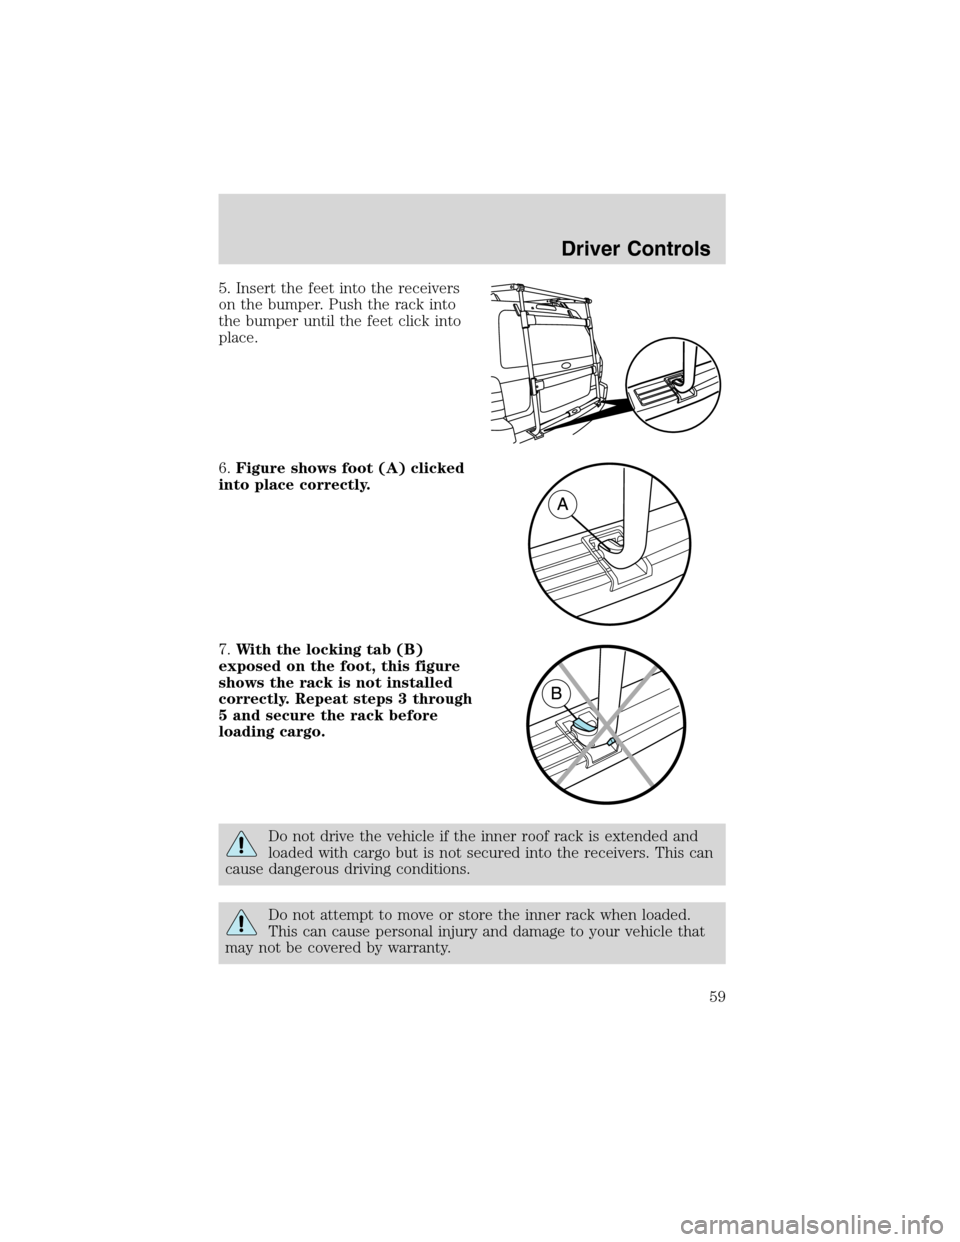 FORD ESCAPE 2003 1.G Owners Manual 5. Insert the feet into the receivers
on the bumper. Push the rack into
the bumper until the feet click into
place.
6.Figure shows foot (A) clicked
into place correctly.
7.With the locking tab (B)
exp